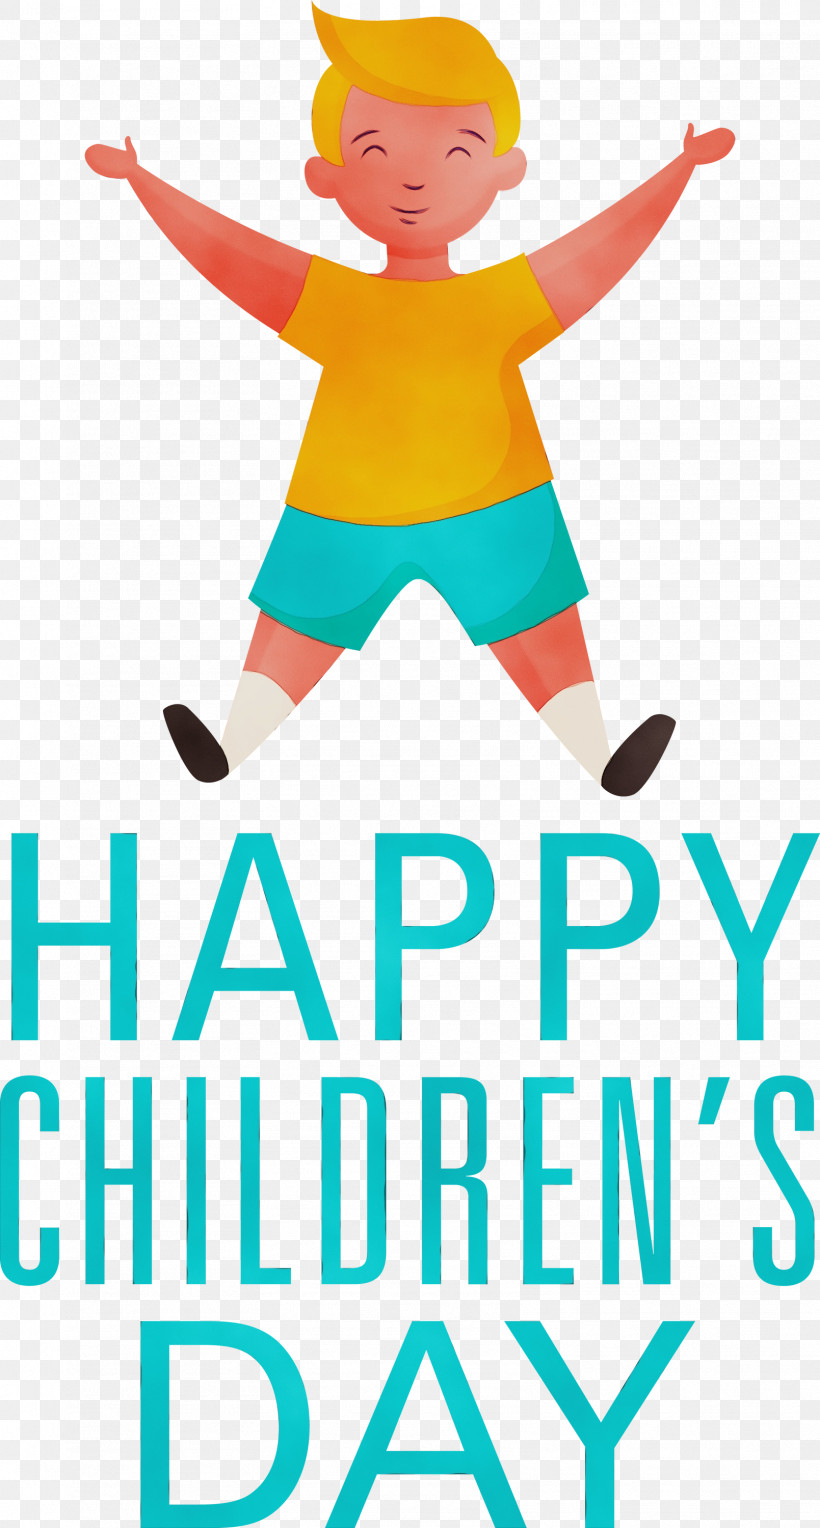 Human Logo Behavior Happiness 7 Wochen Ohne, PNG, 1609x3000px, Childrens Day, Behavior, Happiness, Happy Childrens Day, Human Download Free